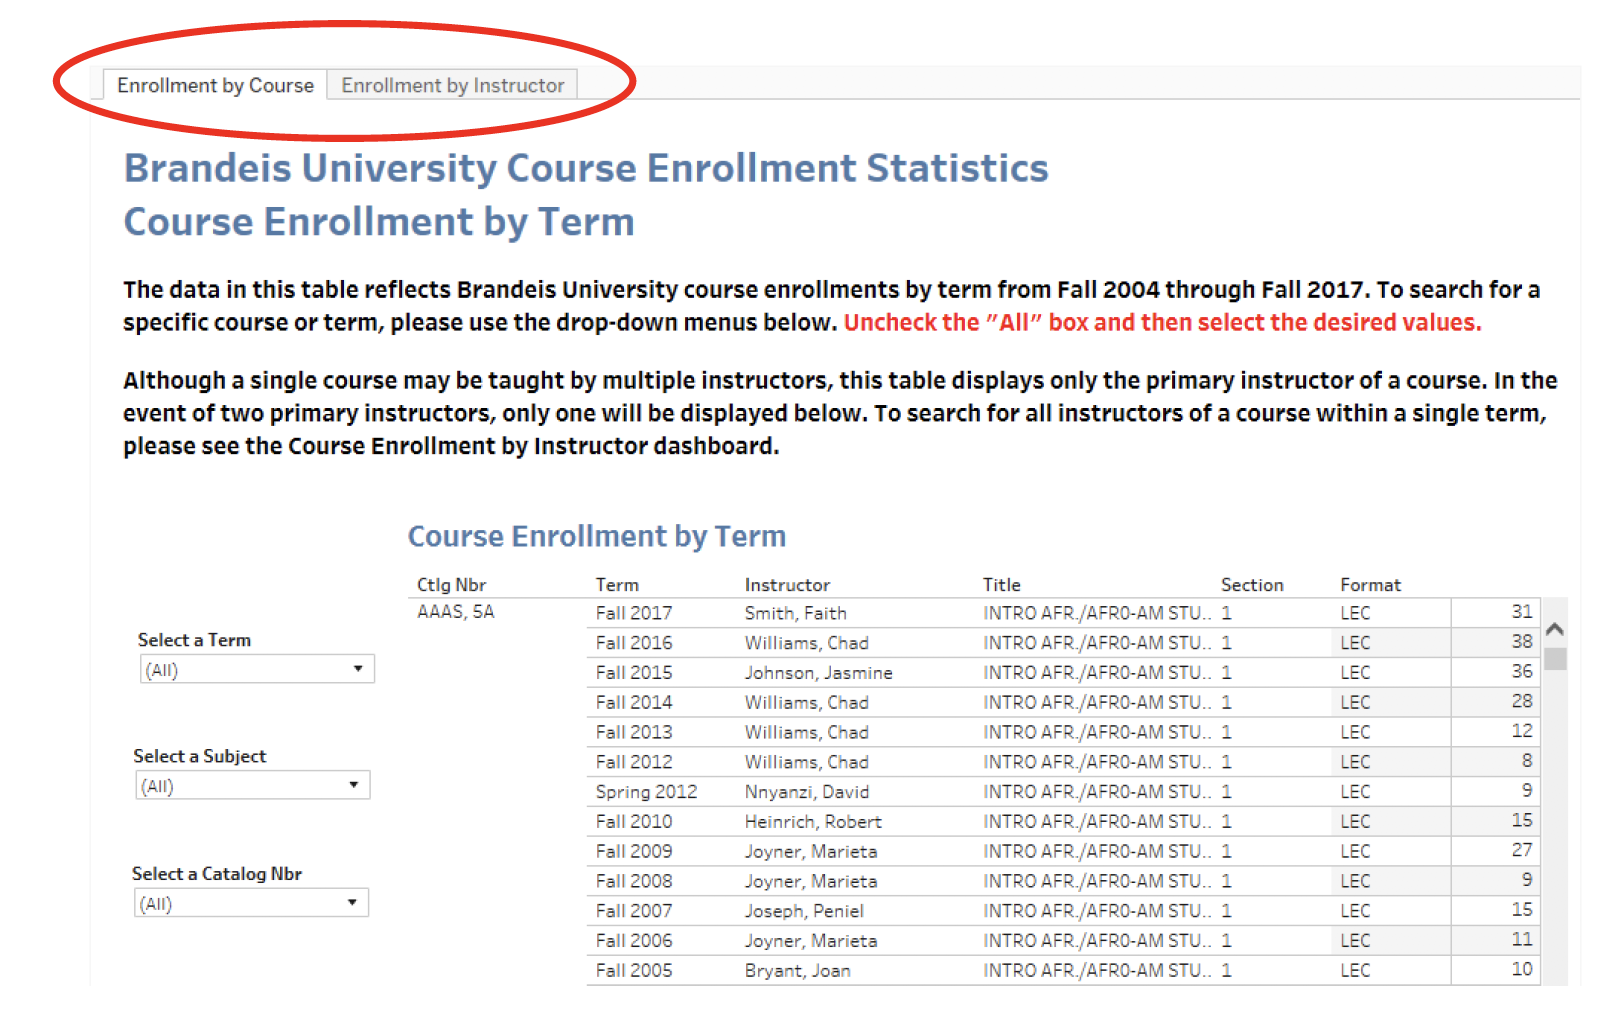 screenshot that uses red circle to identify tabs "enrollment by course" and "enrollment by instructor."